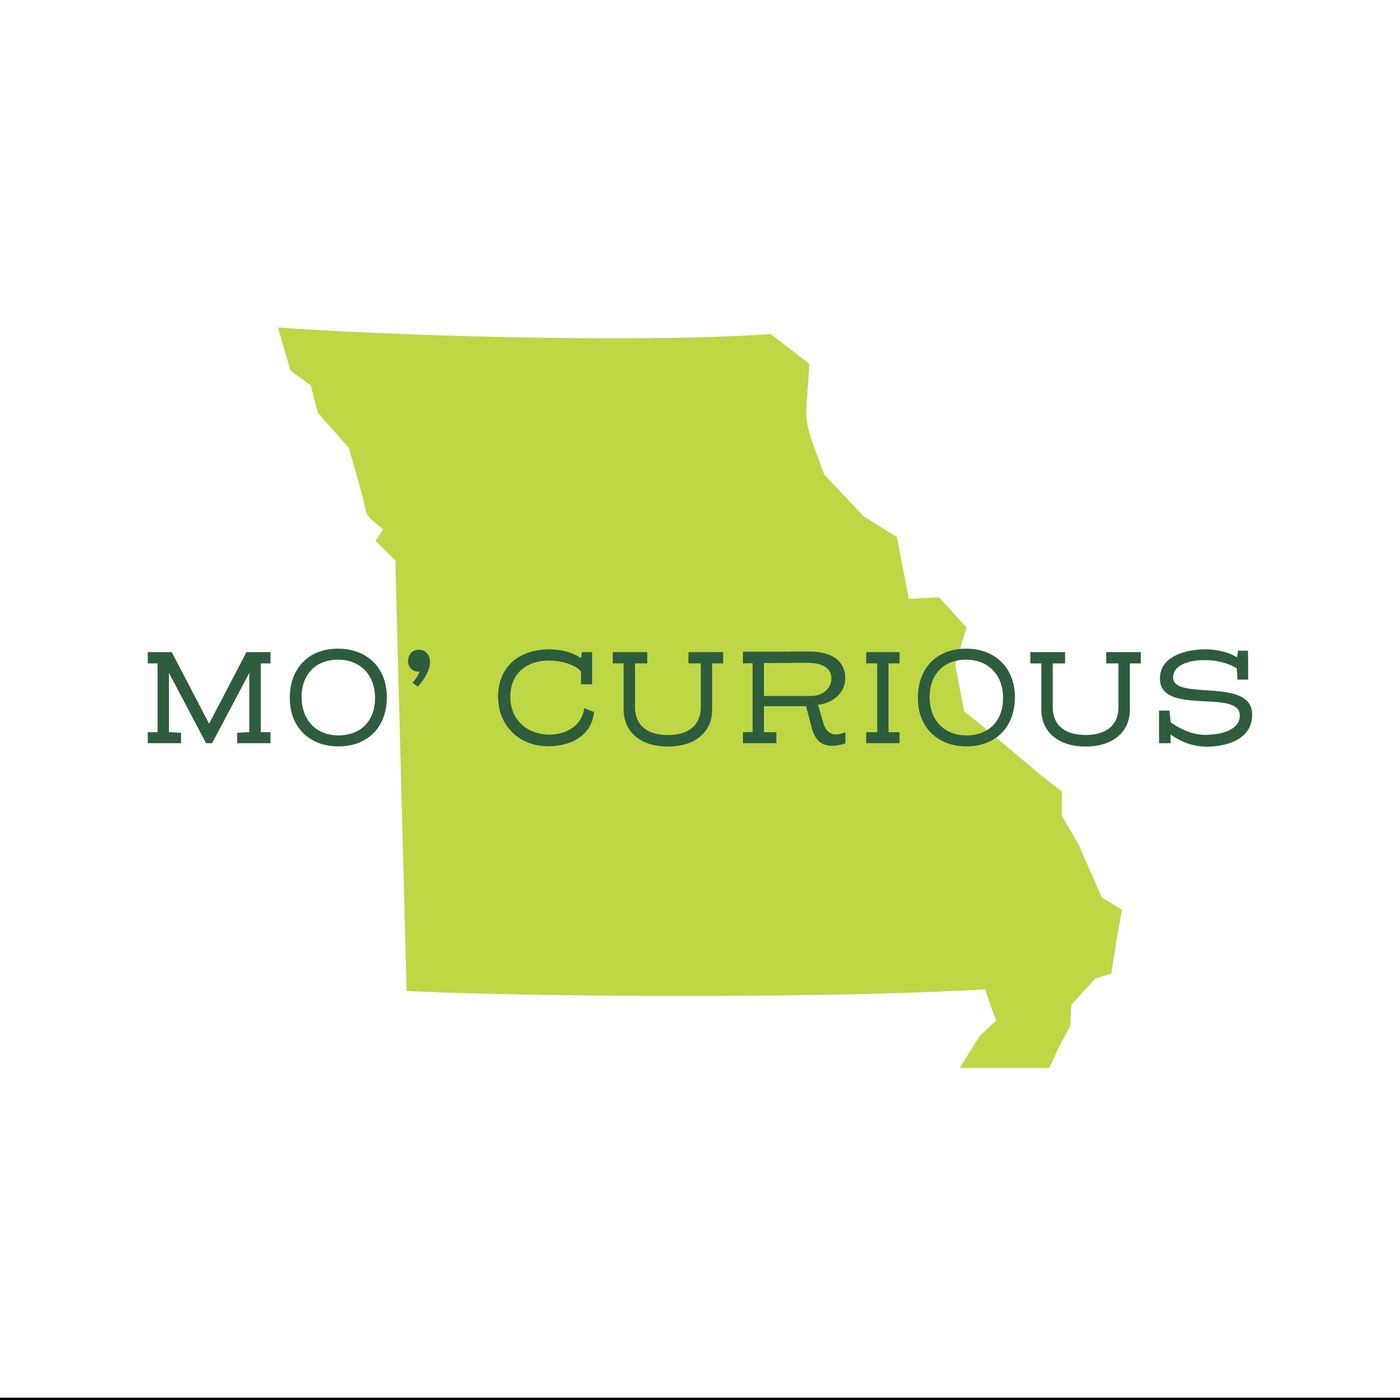 Mo' Curious: Preserving the Disappearing Memory of Missouri's Little Tuskegee